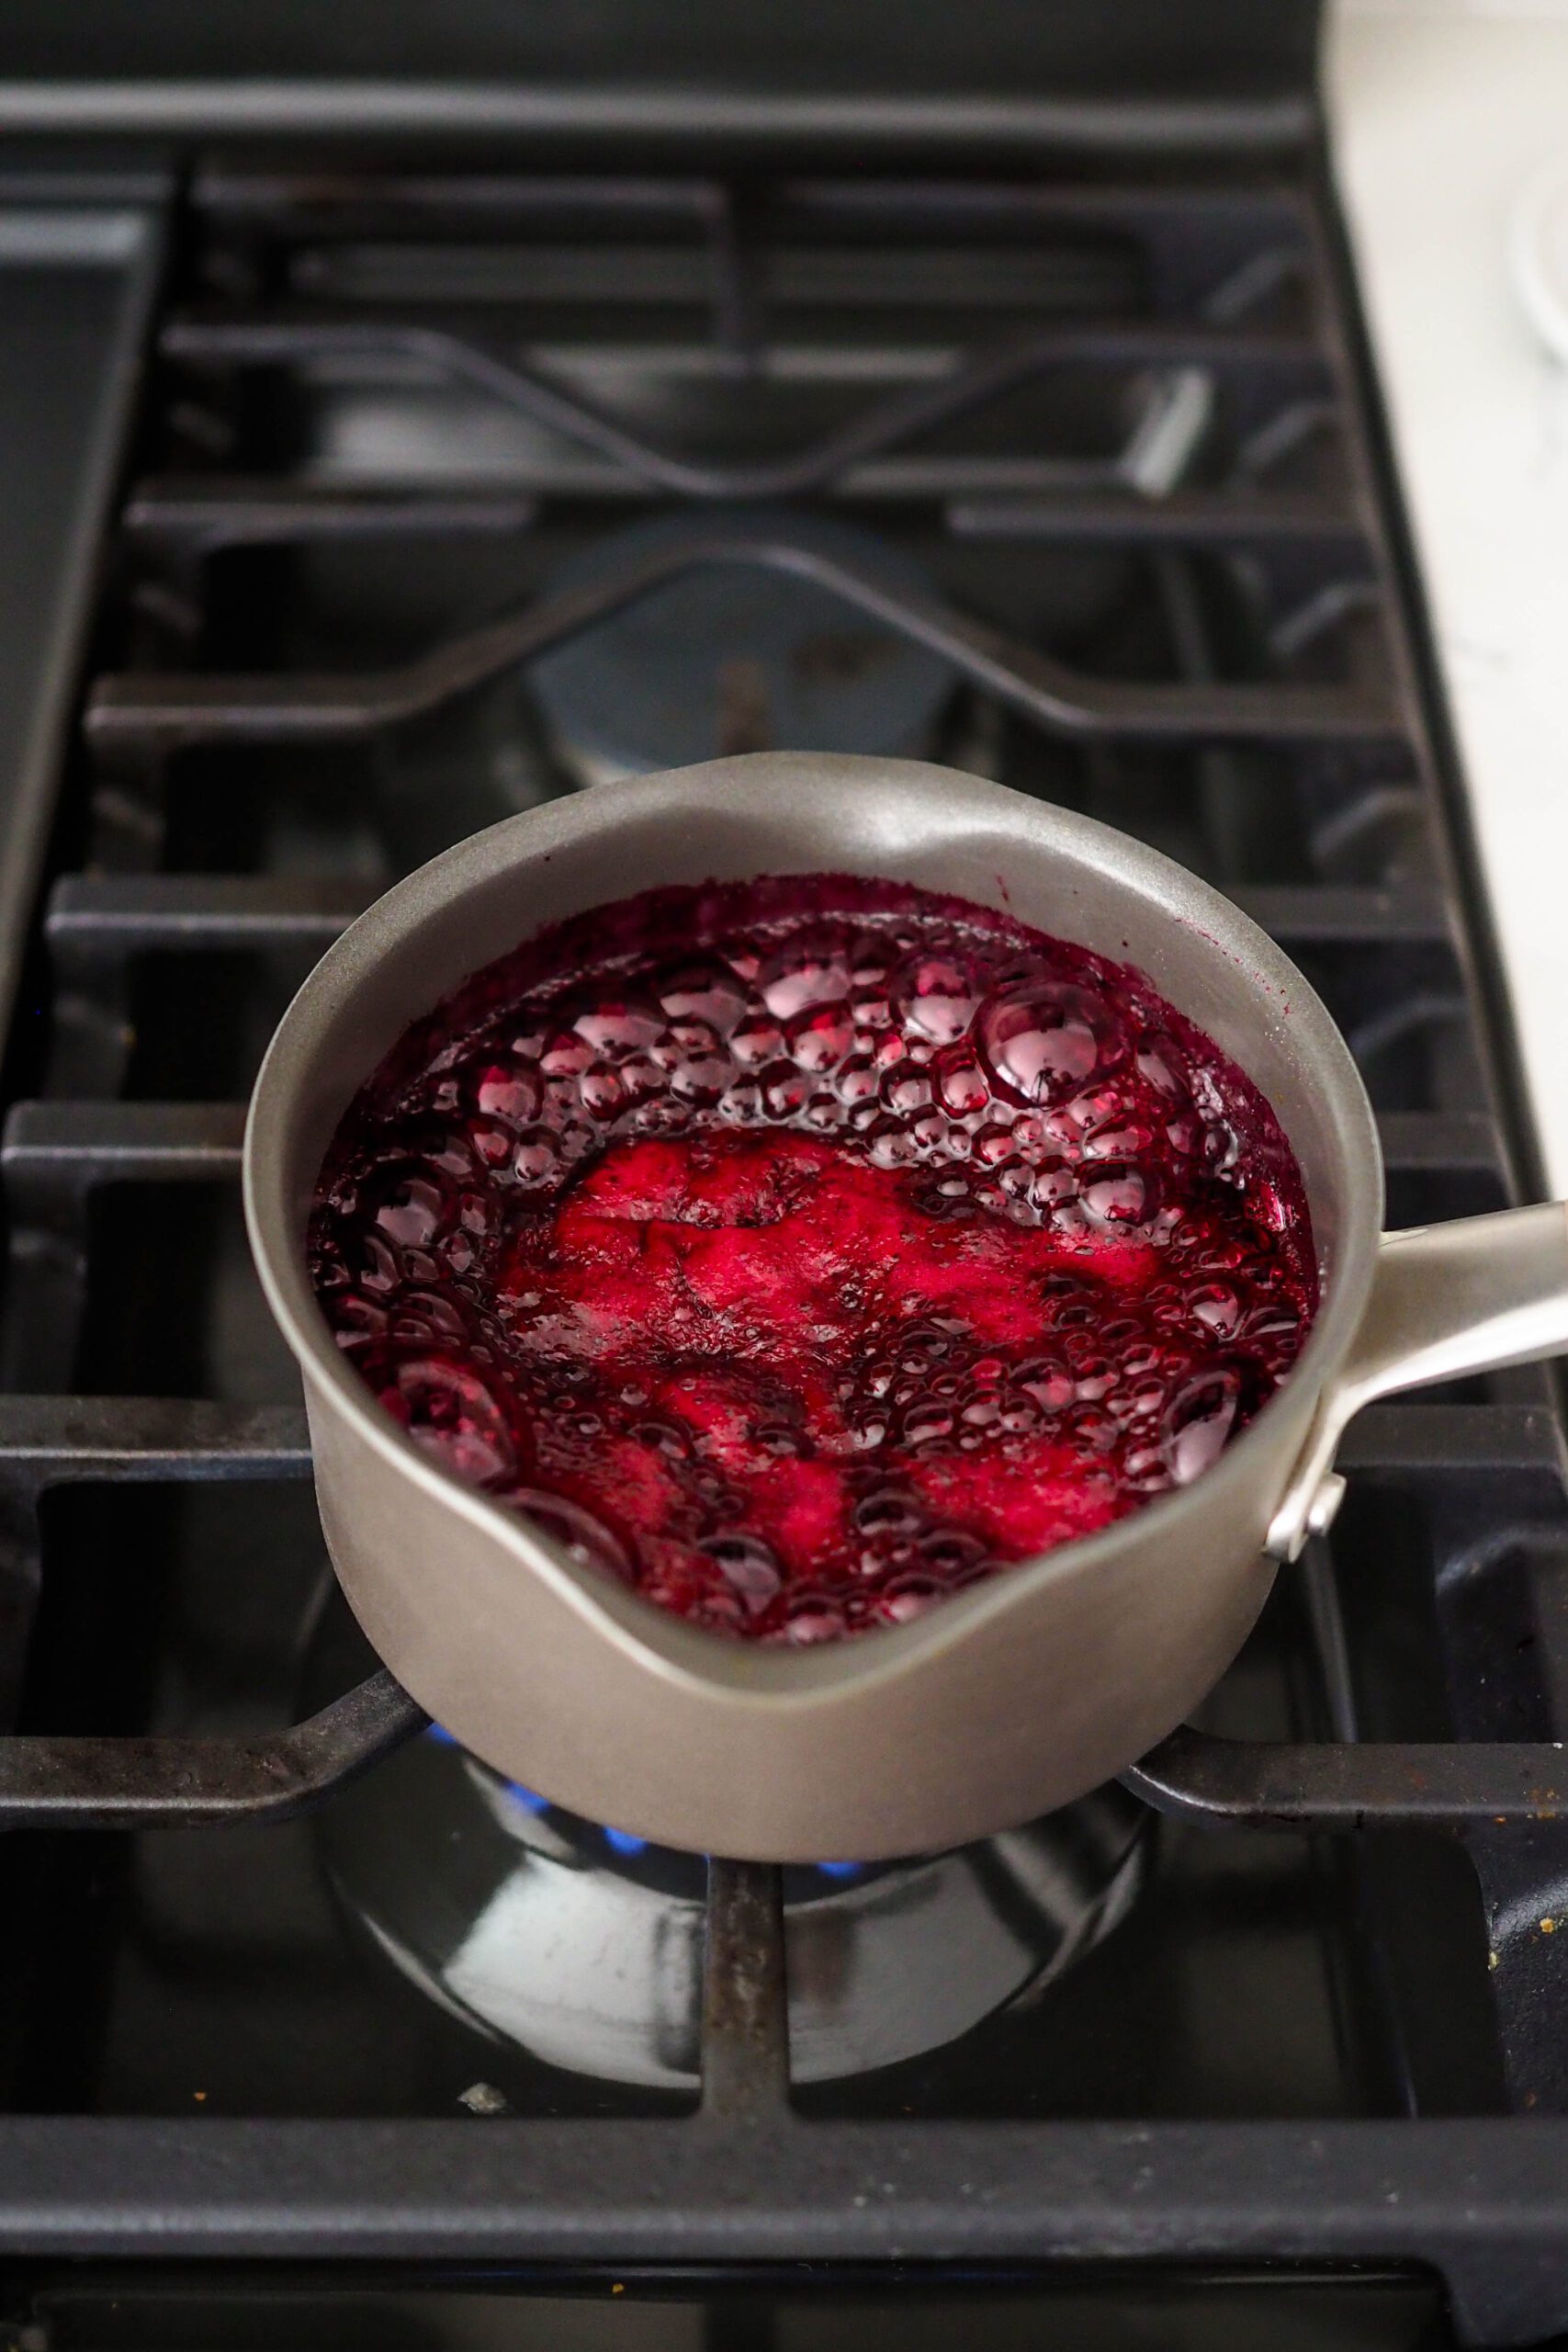 Blueberries boiling in a small pot over the stove.